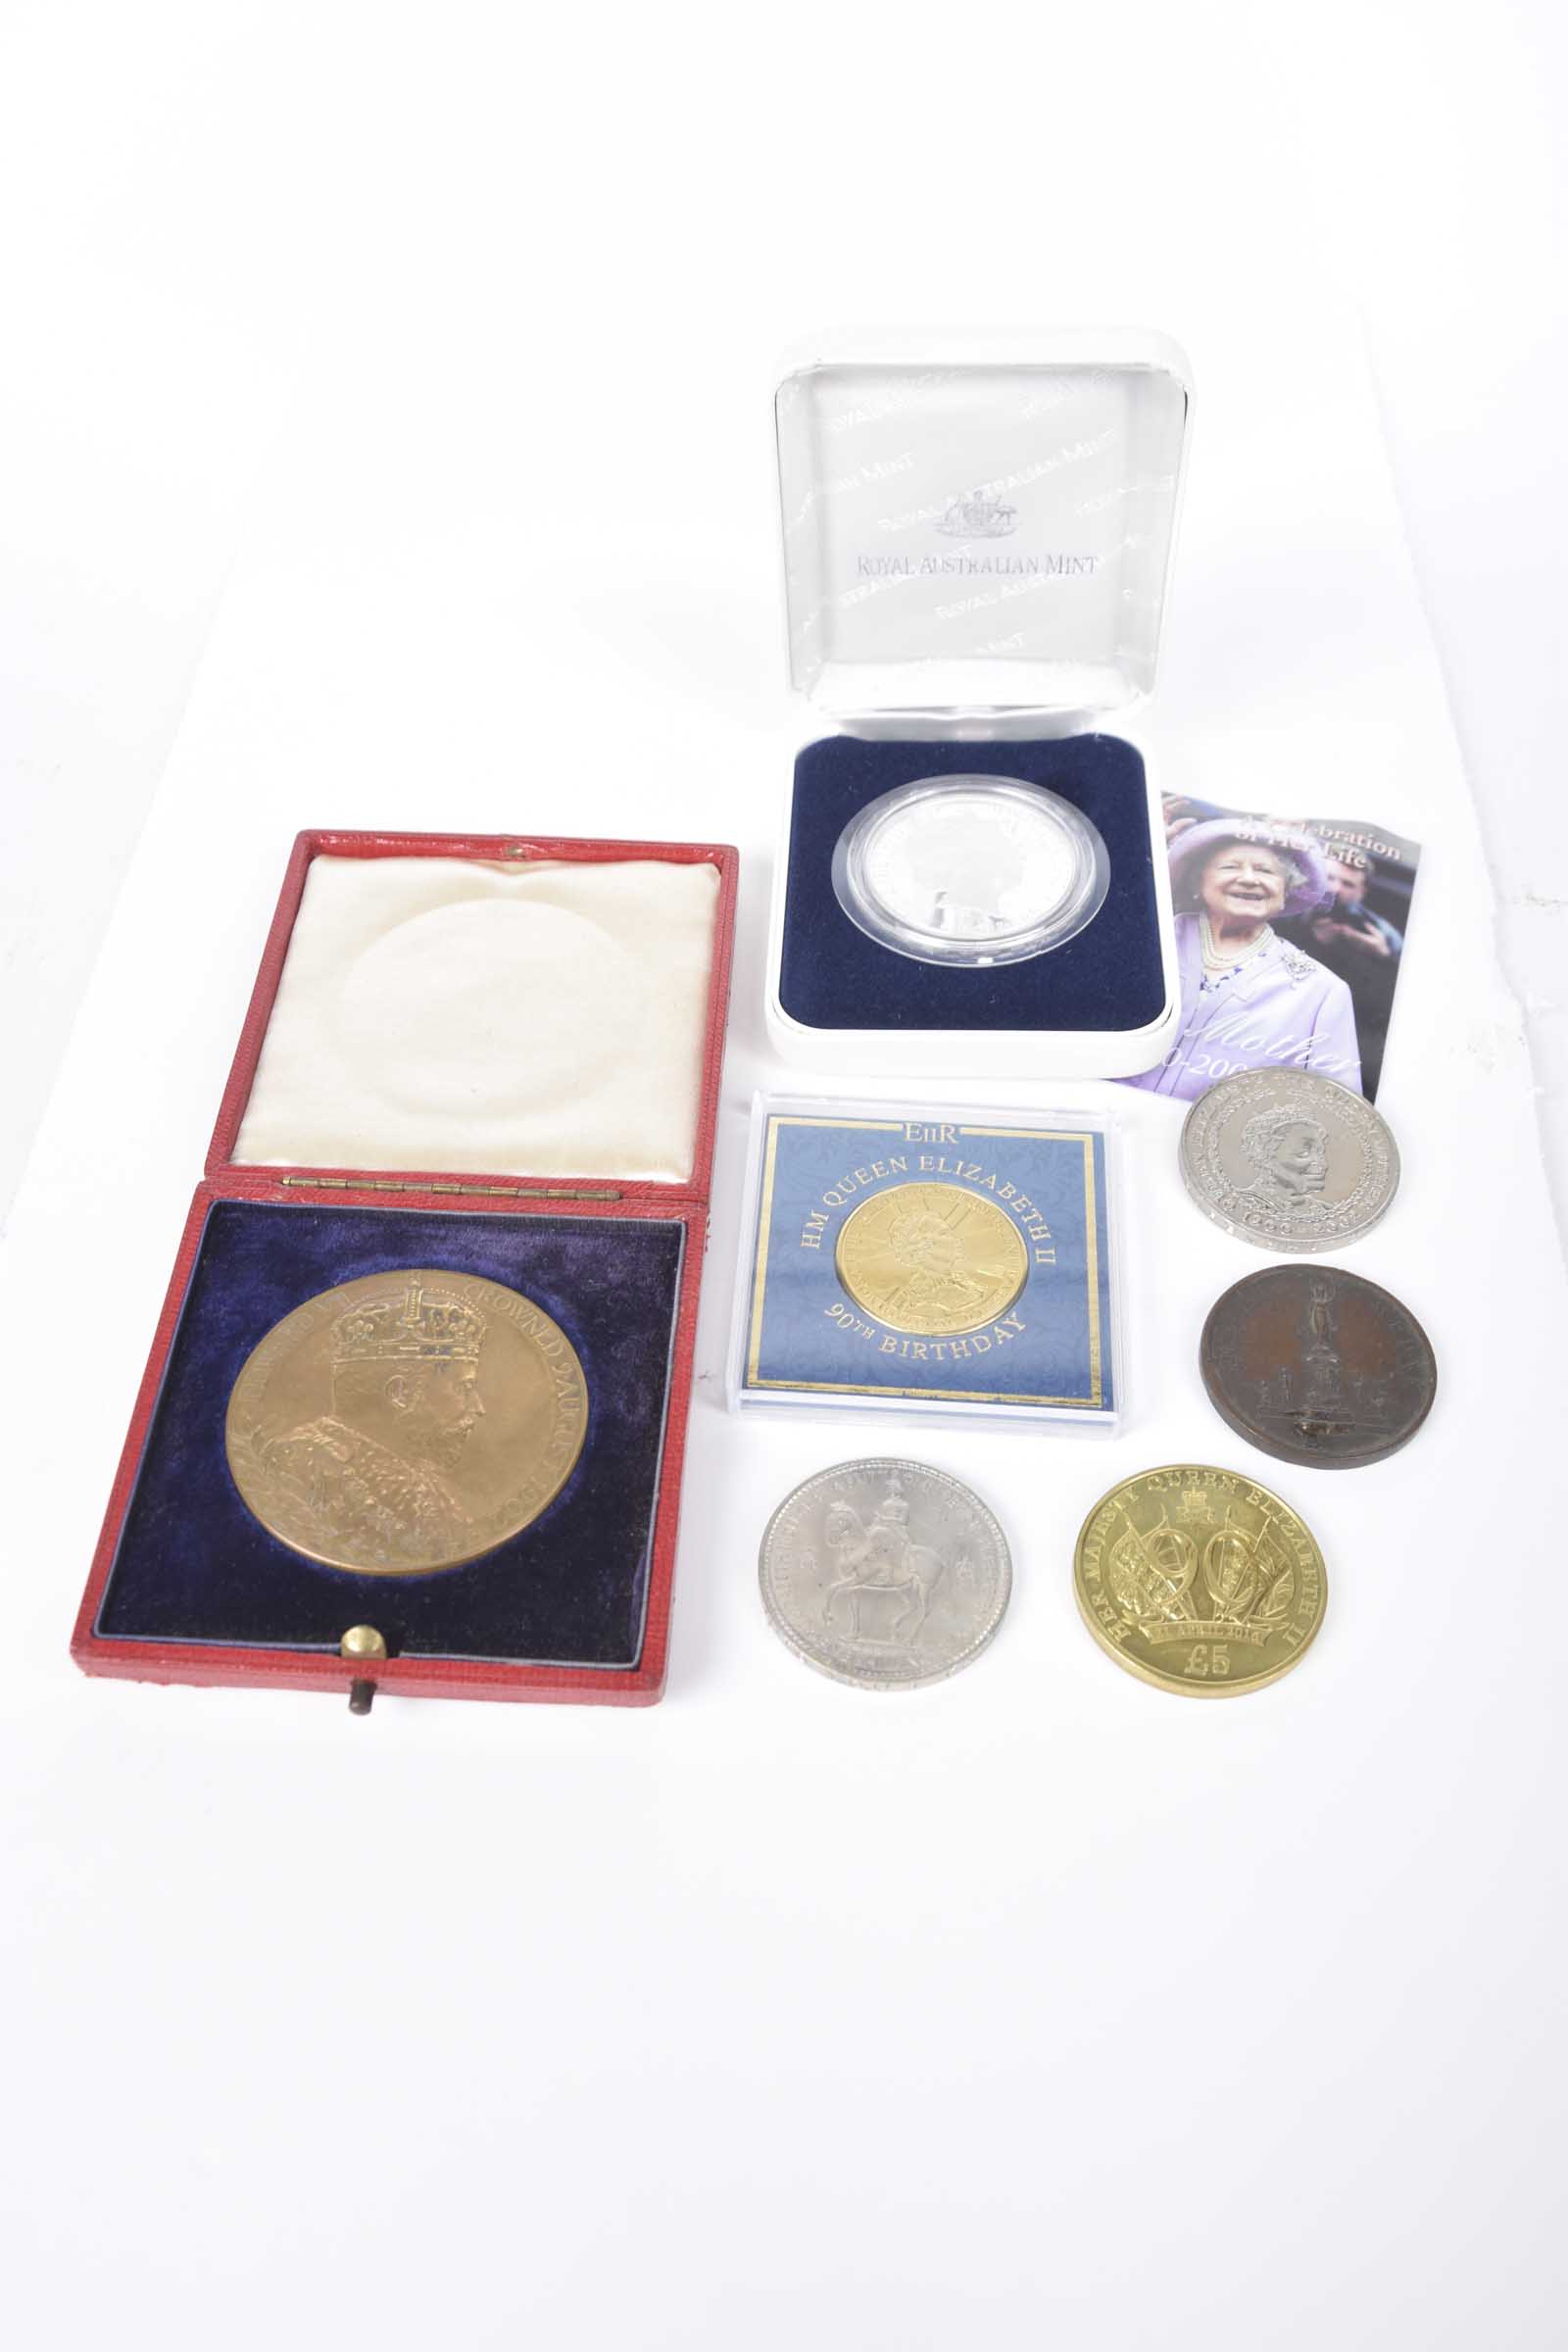 An Edward VII bronze Coronation medal and other commemorative coins Including a Queen Mother